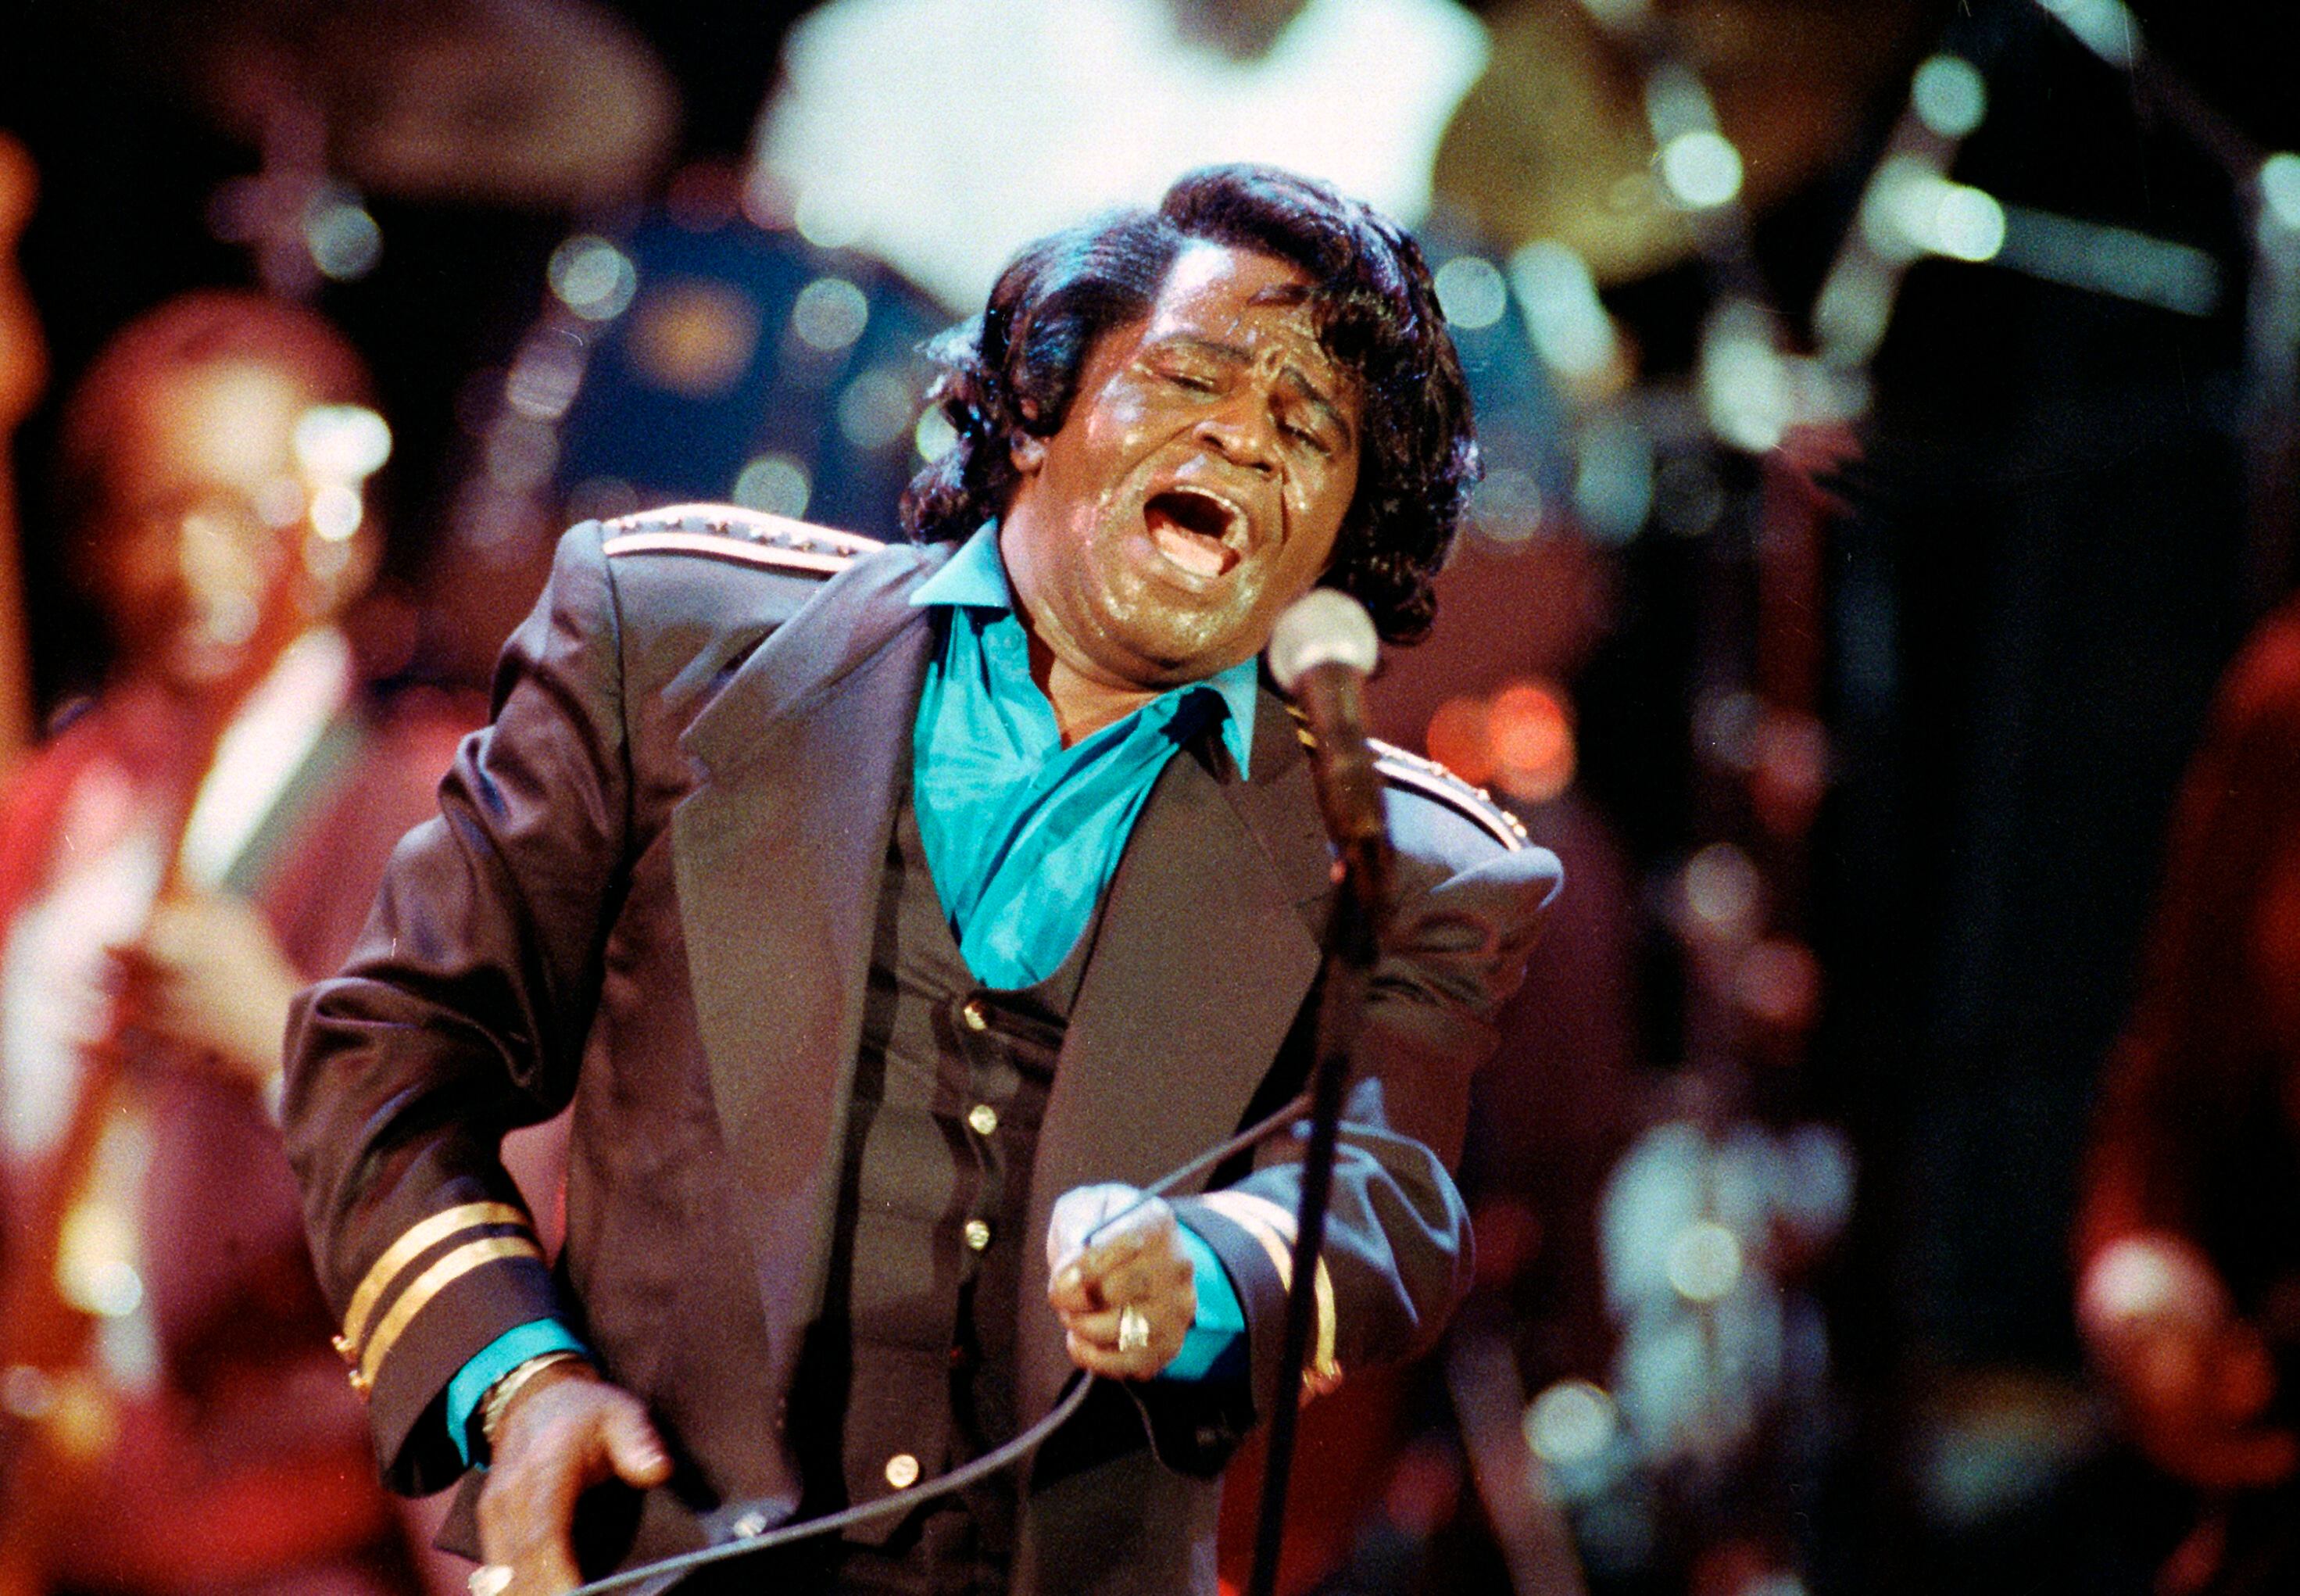 Family of James Brown settles 15-year battle over his estate